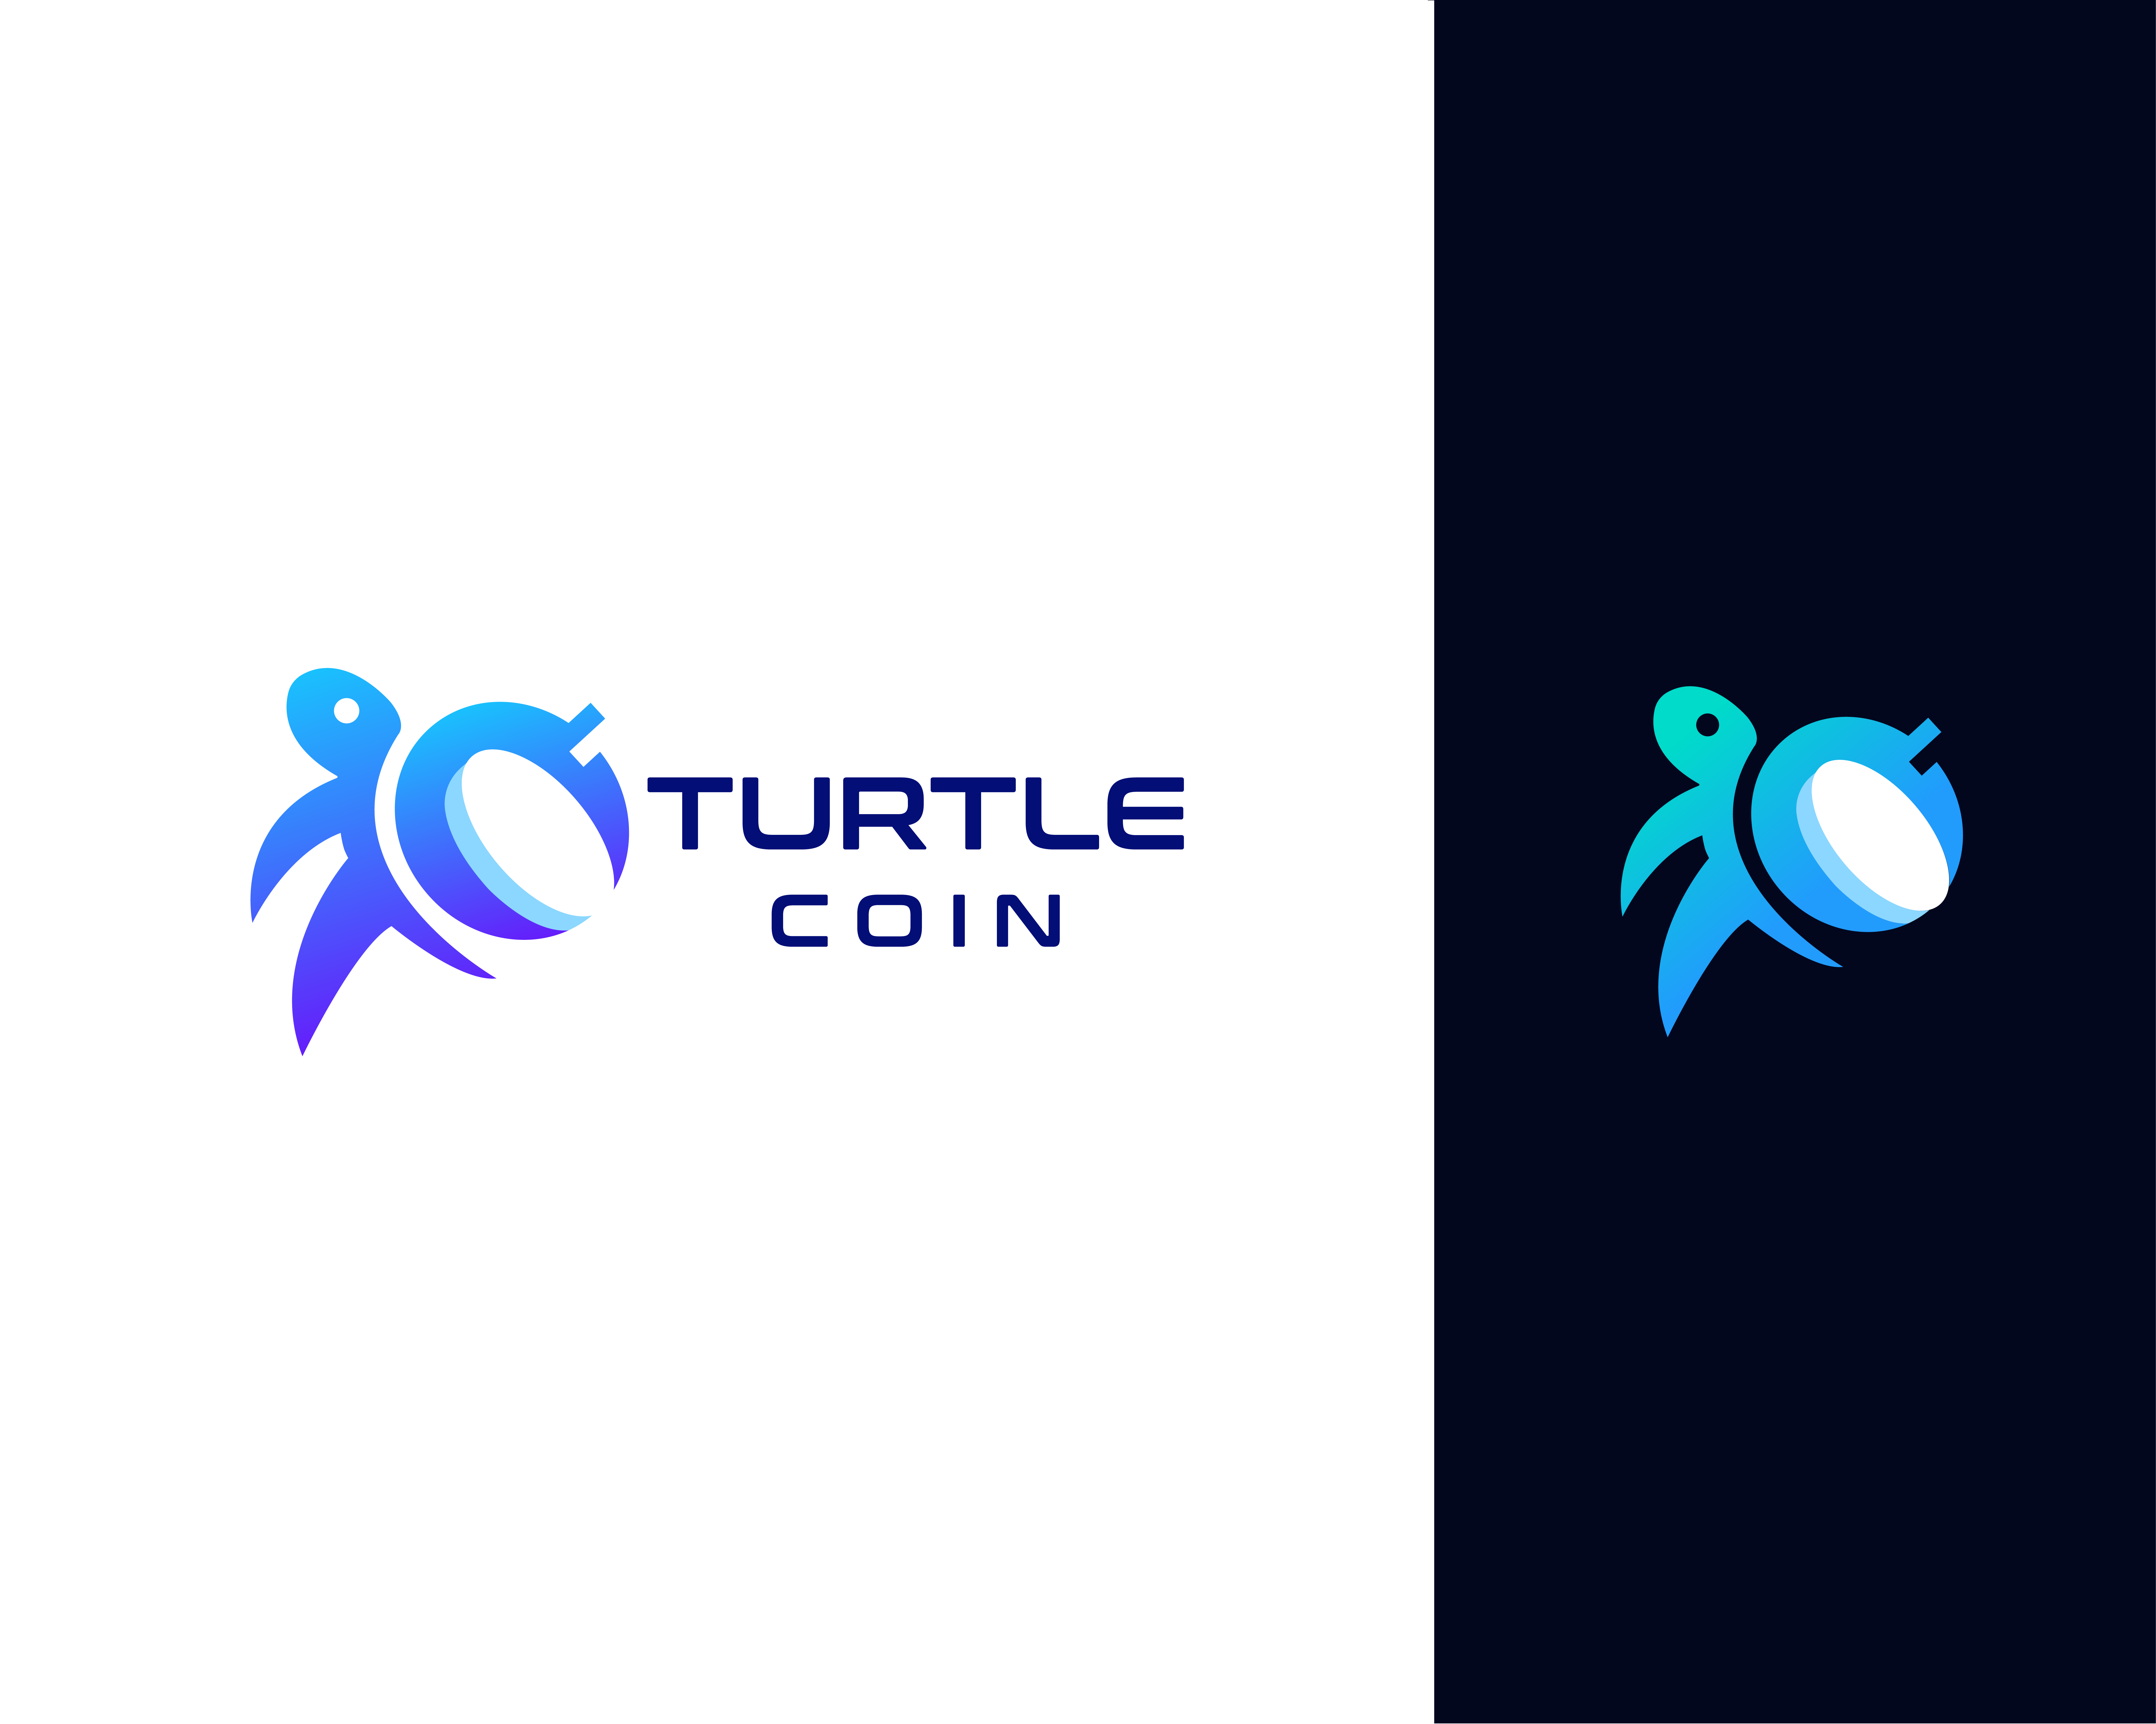 TurtleCoin is a Fun, Fast, Easy,Business digital currency!